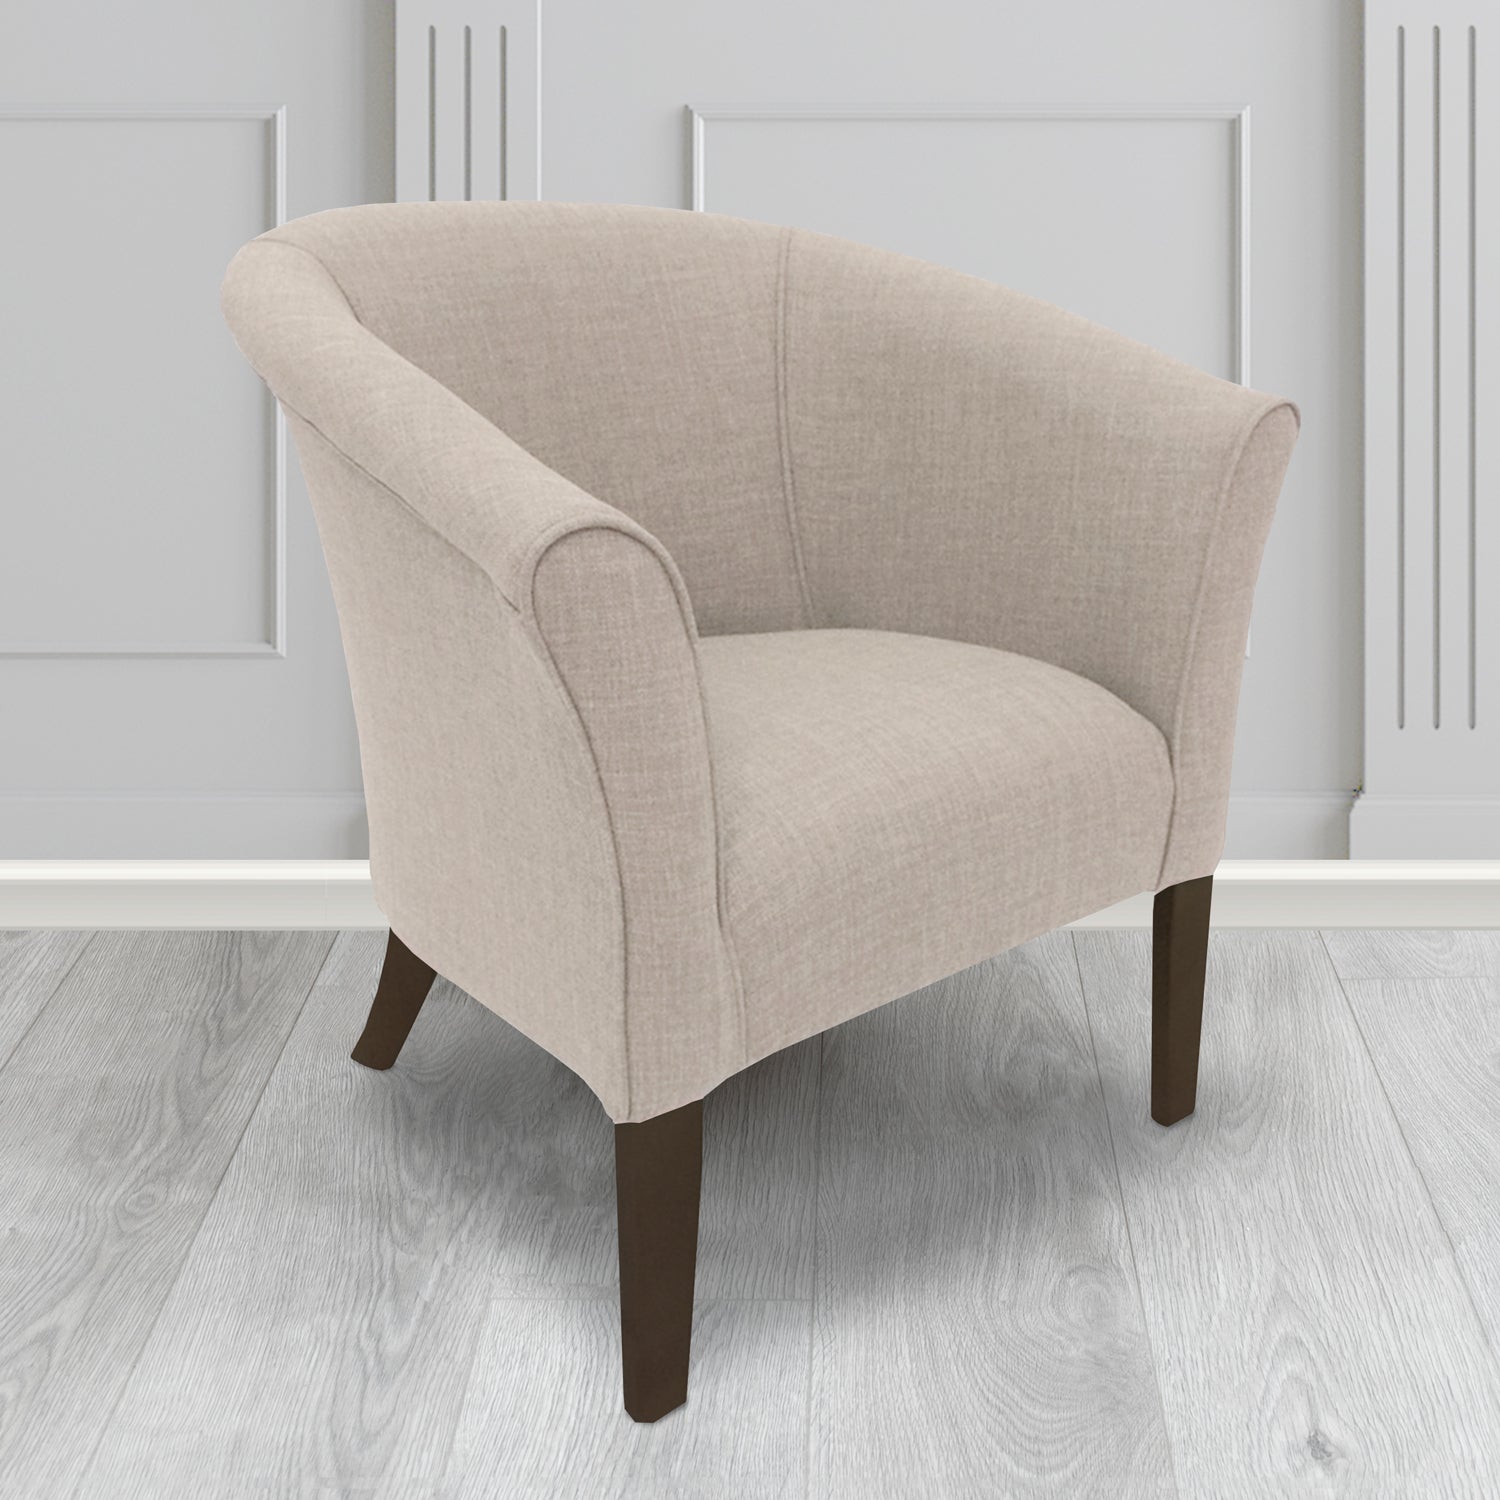 Quill Tub Chair in Linetta Light Grey Crib 5 Plain Fabric - Antimicrobial, Stain Resistant & Waterproof - The Tub Chair Shop